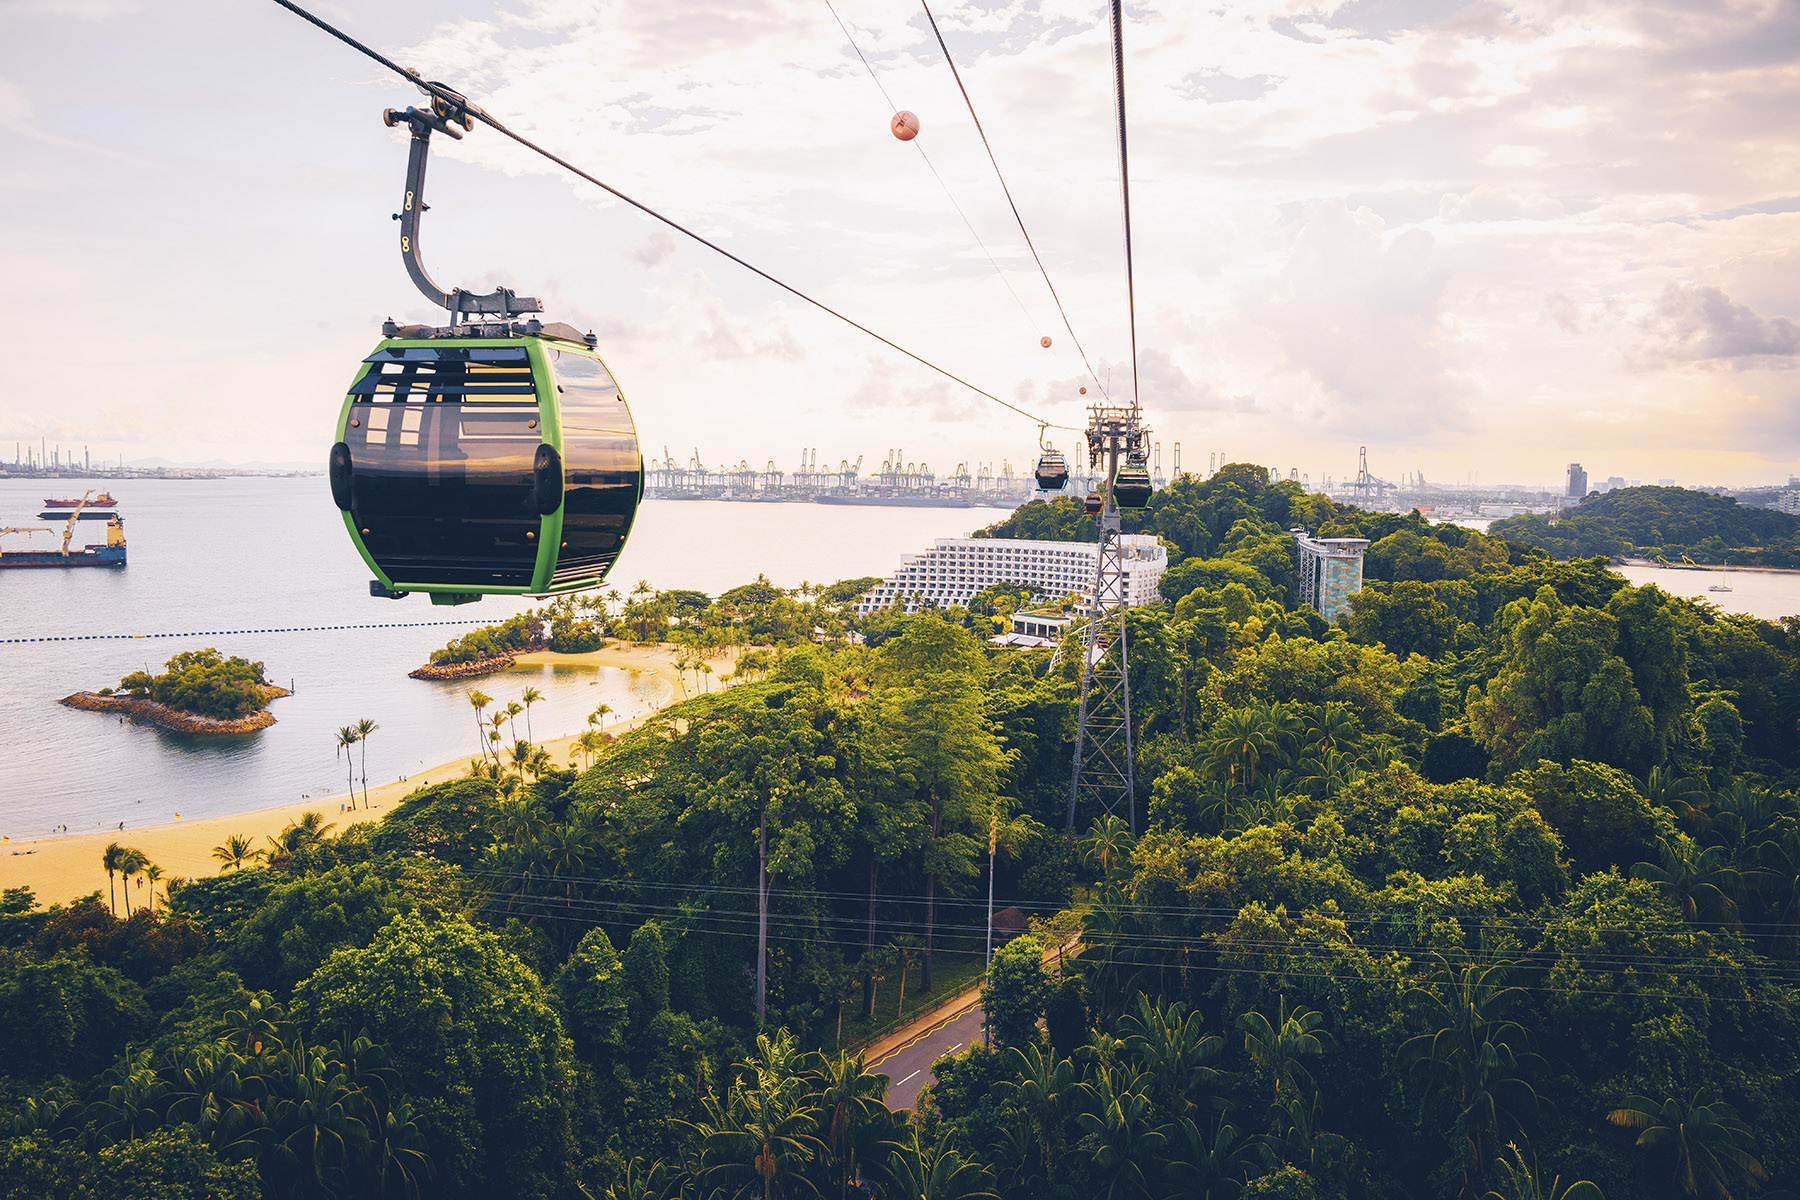 A cable car moving across Sentosa Island in Singapore

